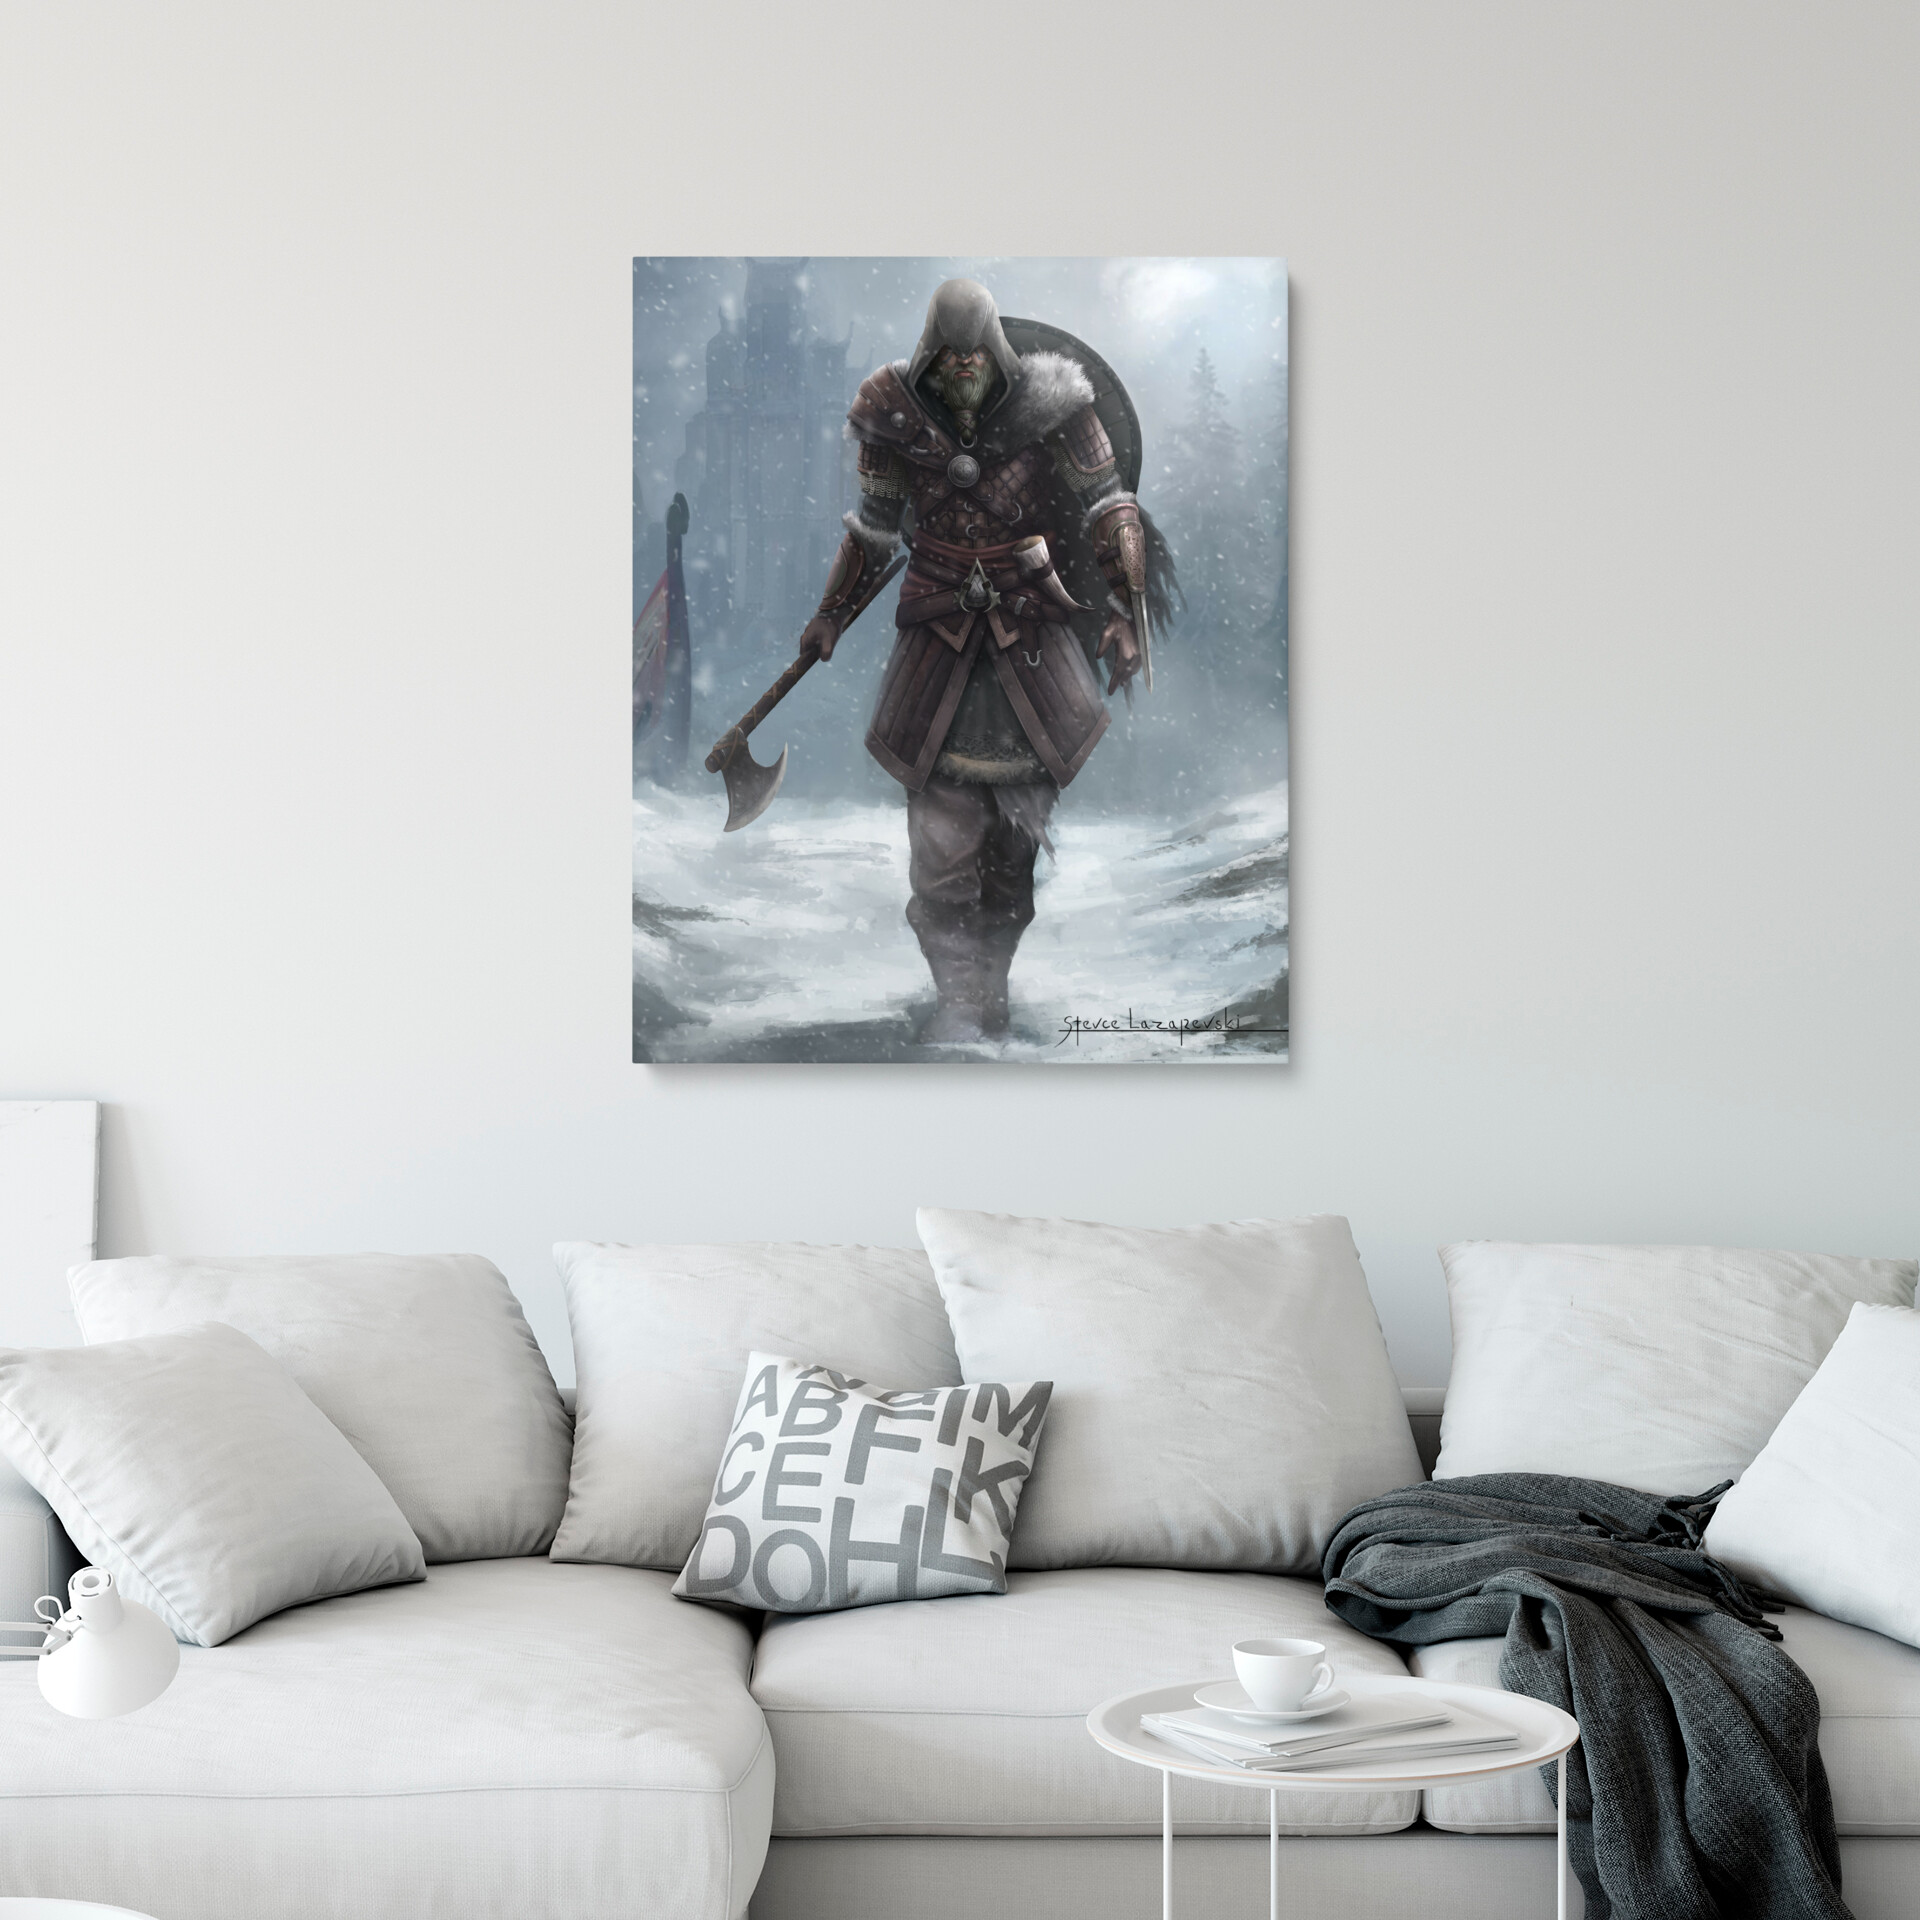 YLAXX 5 Panel Wall Art Assassin Creed Valhalla Axe Snow Torch Art  Collection Decorative Gifts Study Painting Artwork 200 x 100 cm Frameless :  : Home & Kitchen